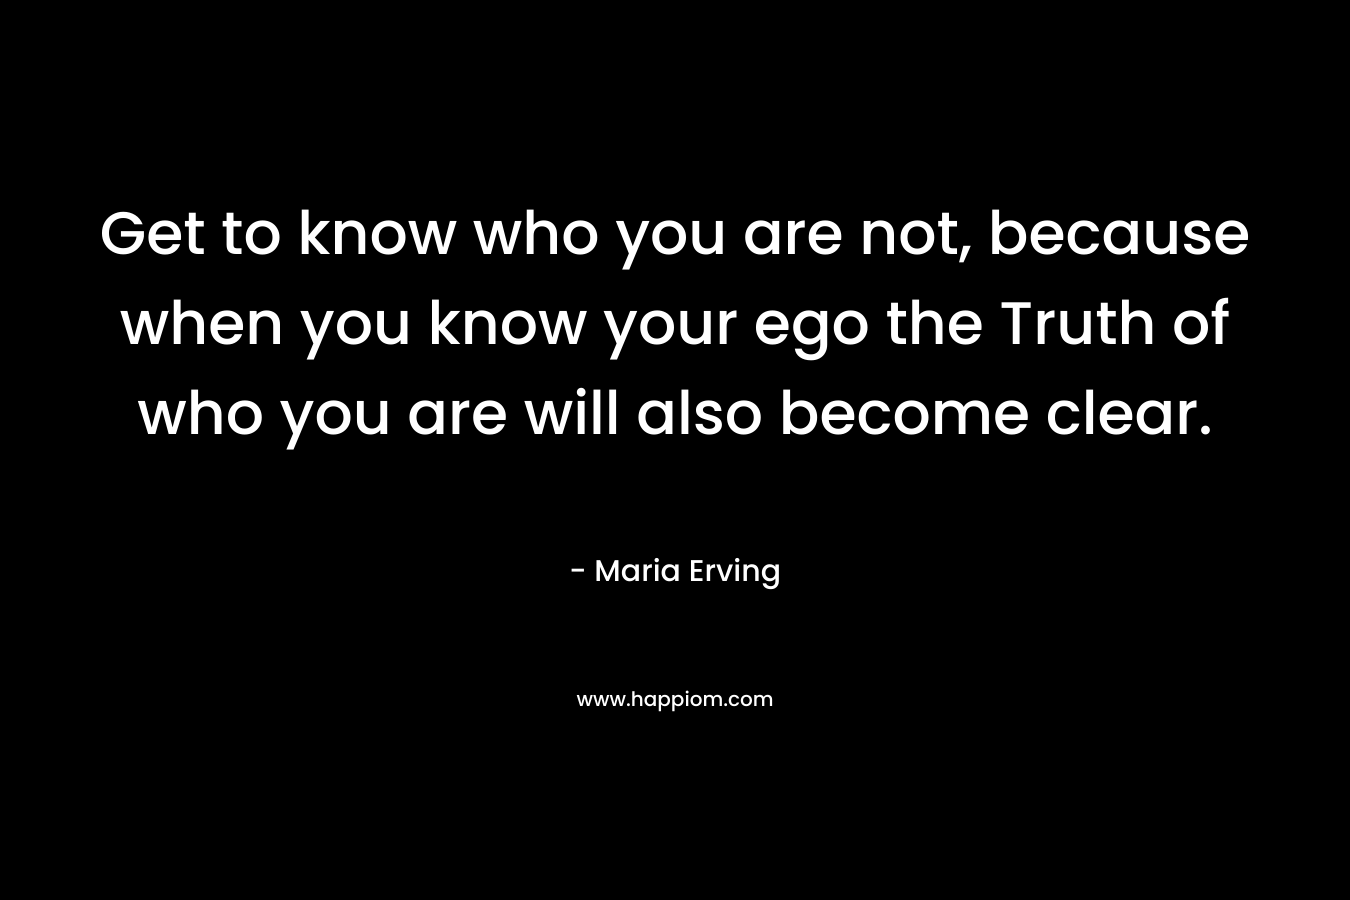 Get to know who you are not, because when you know your ego the Truth of who you are will also become clear. – Maria Erving